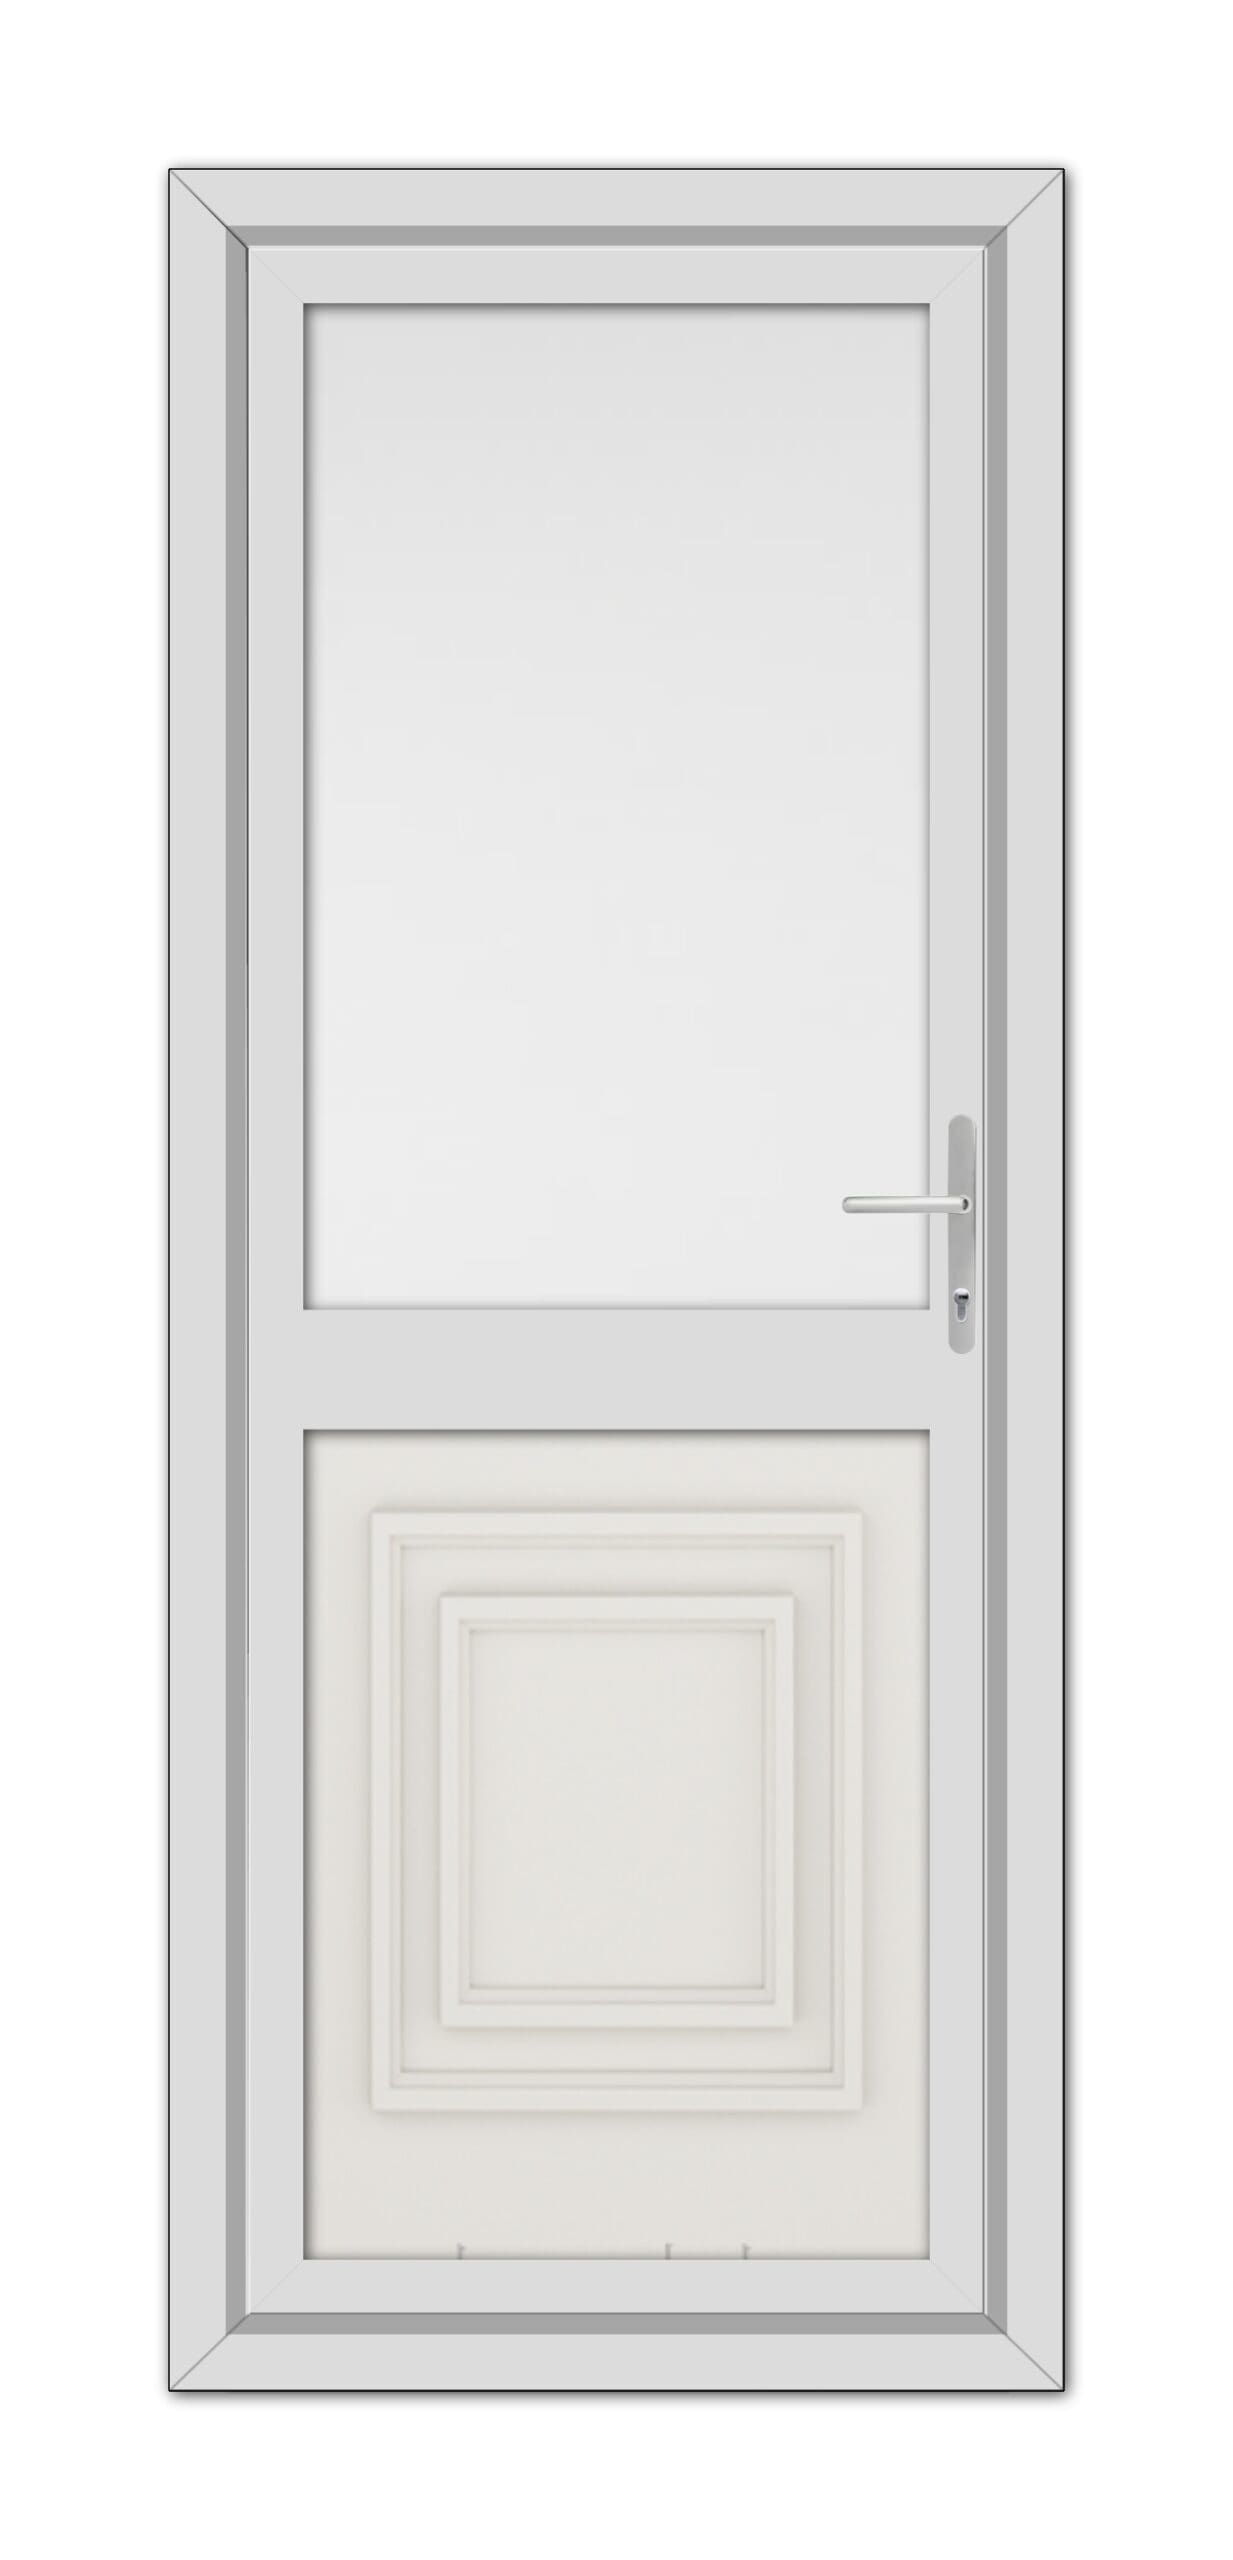 A modern White Cream Hannover Half uPVC Back Door with a metallic handle and a decorative rectangular panel at the bottom, isolated on a white background.